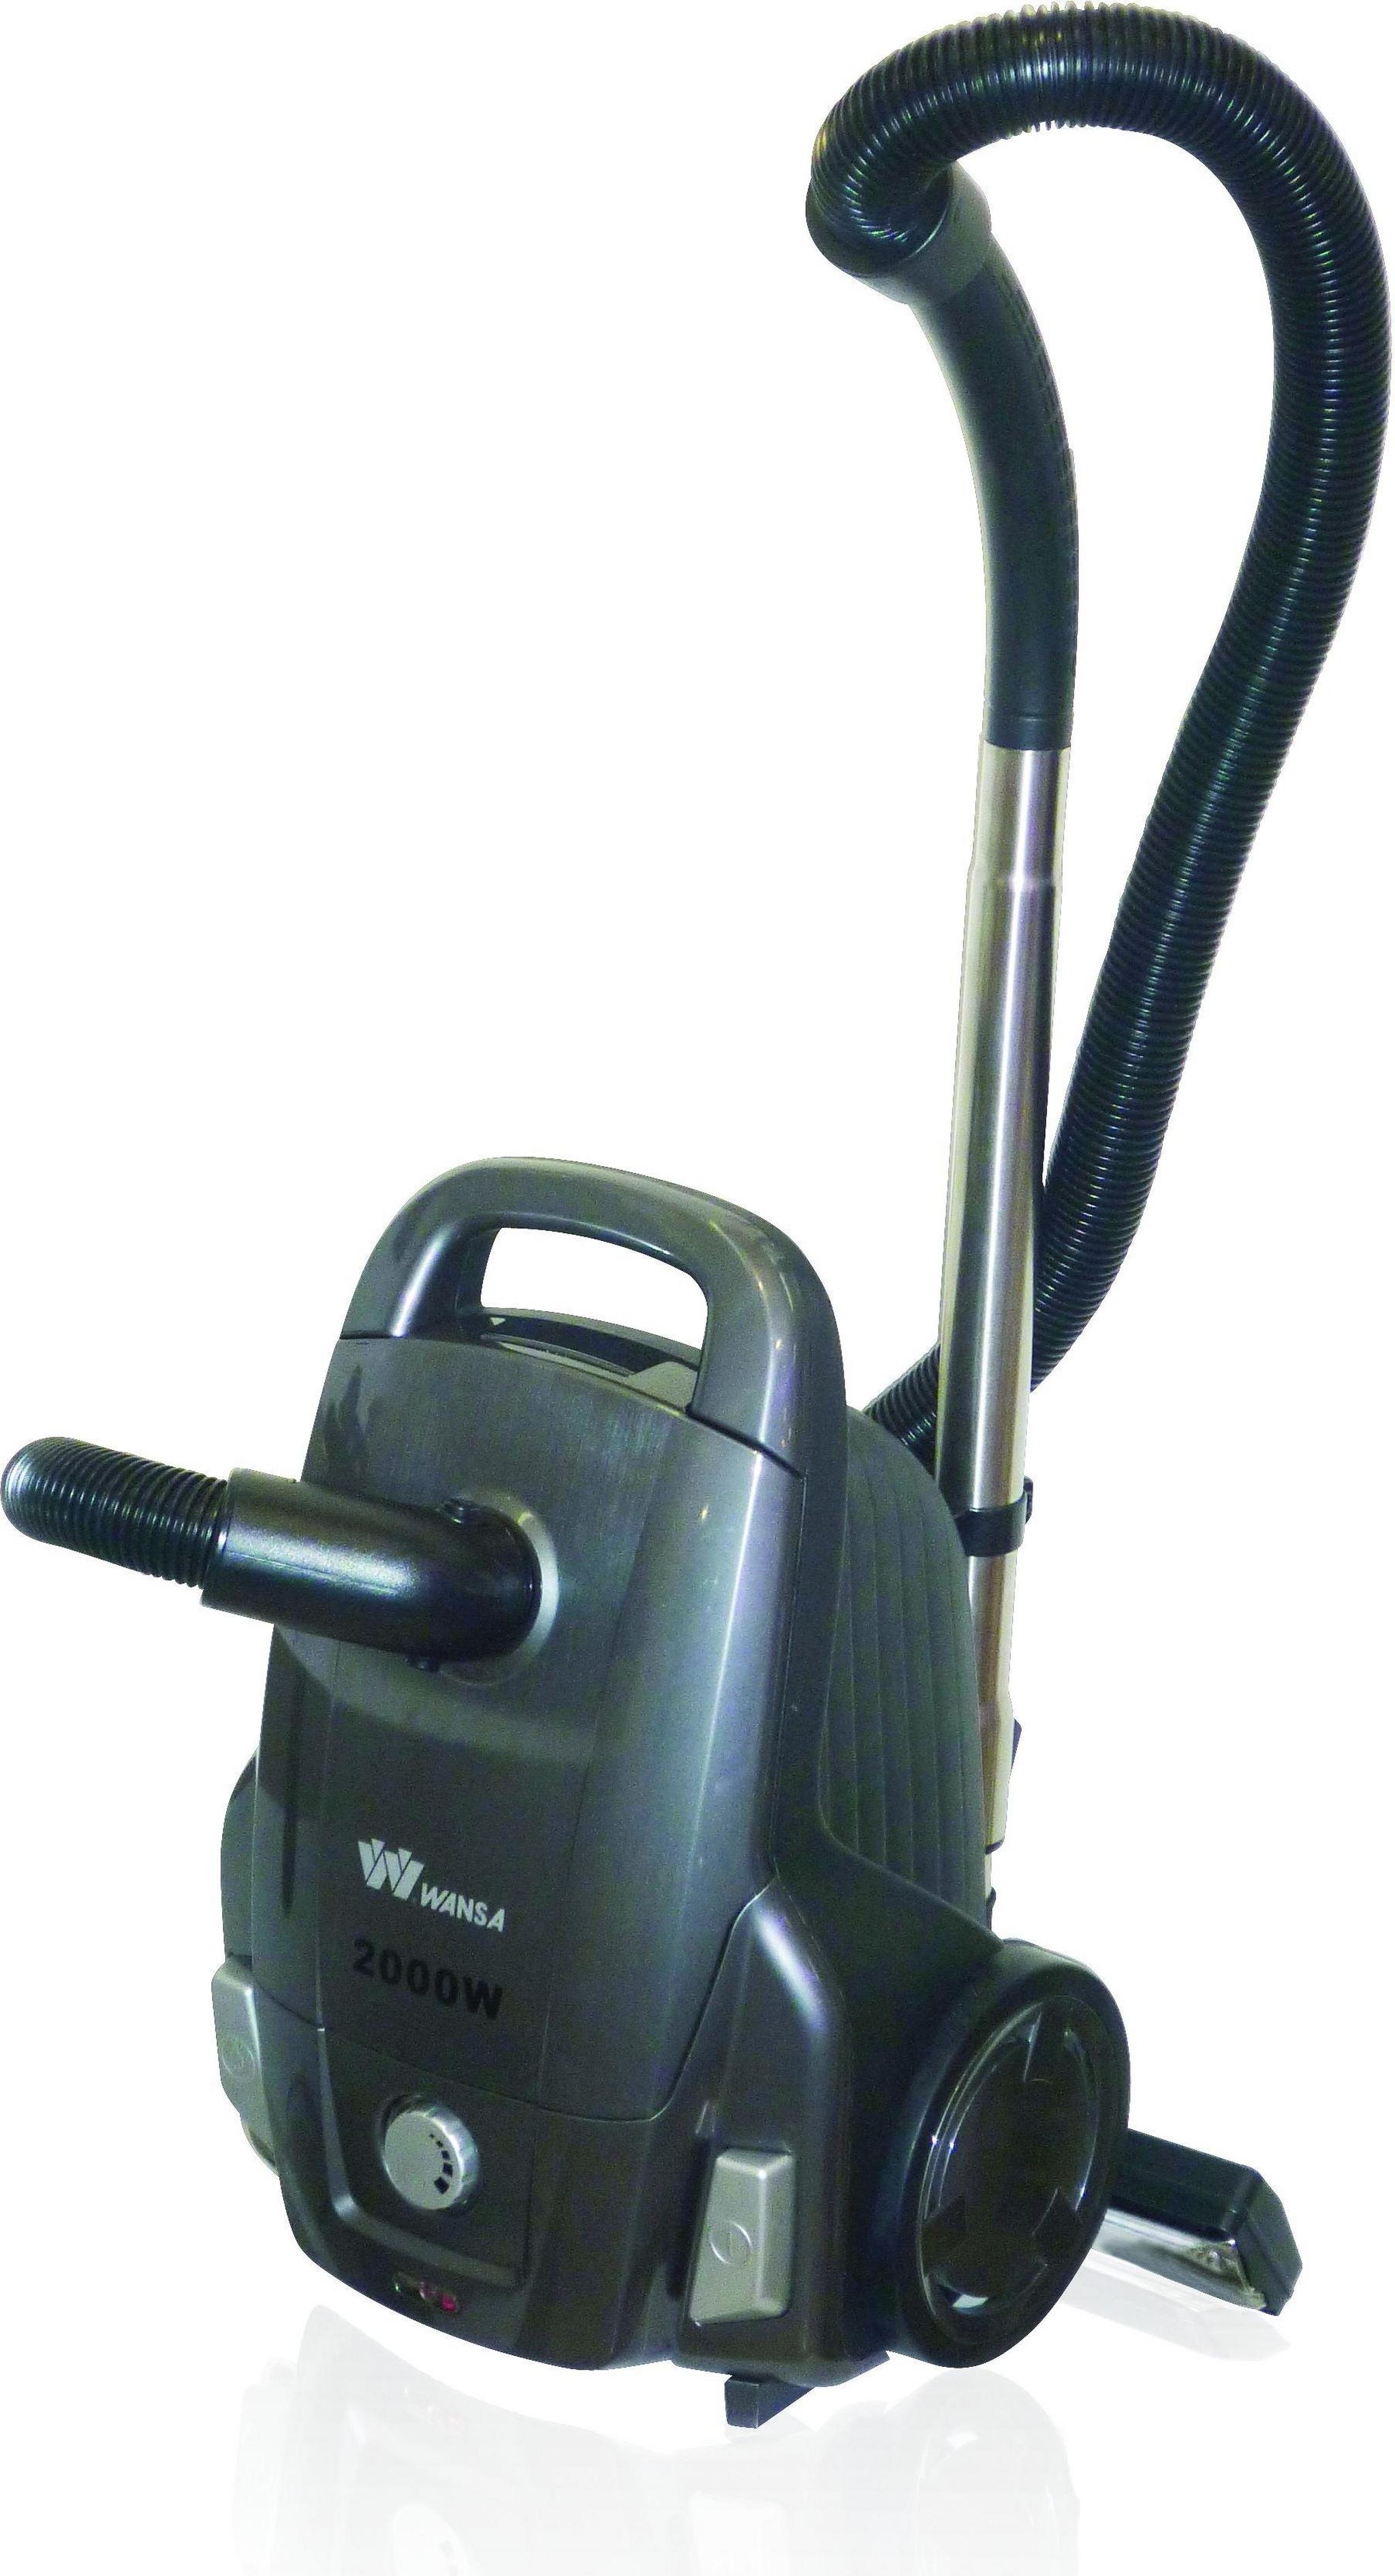 Wansa Canister Vacuum Cleaner 2000W